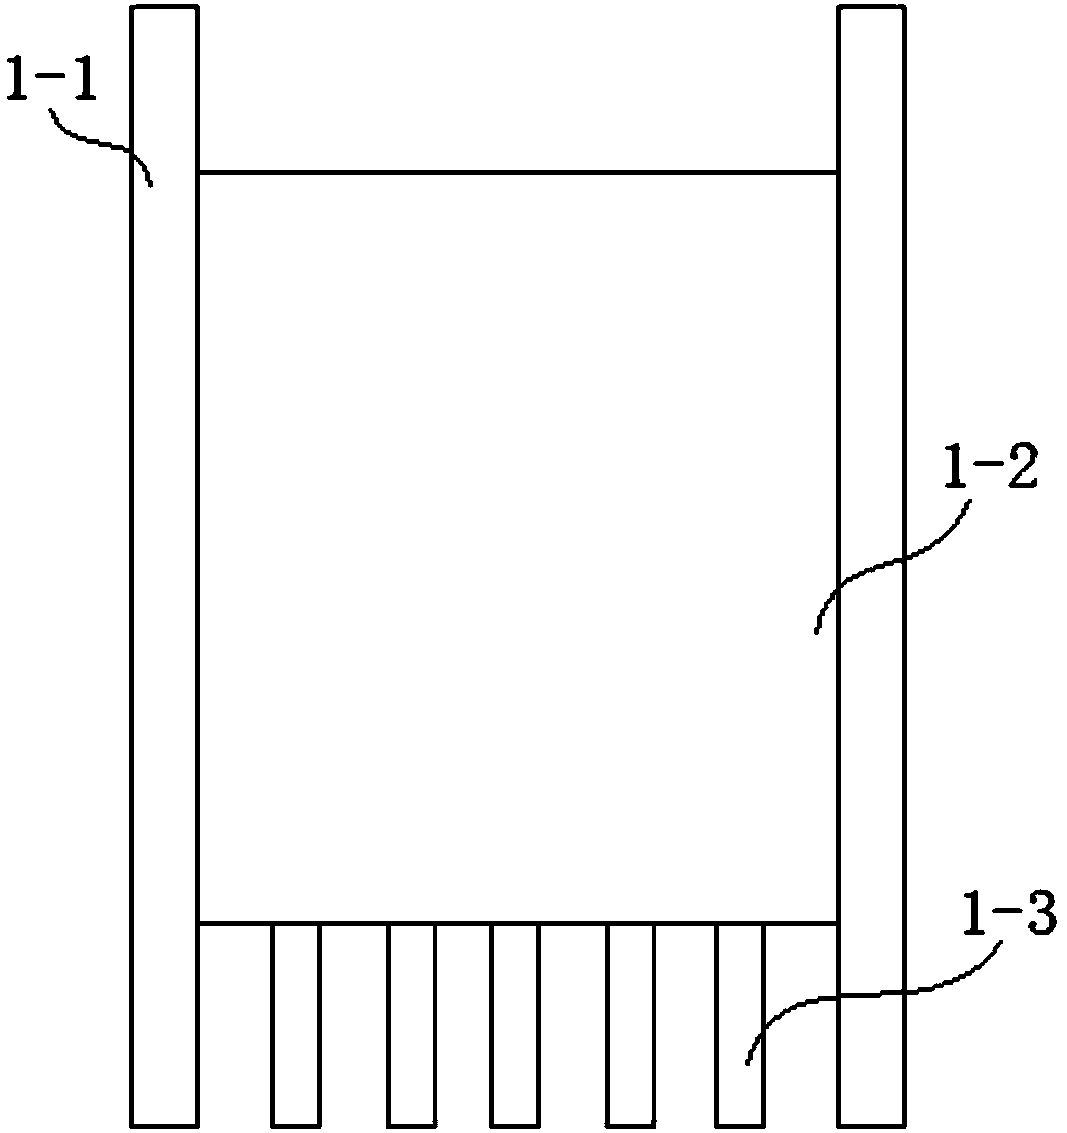 An assembly method of an integral hydraulic stamping machine